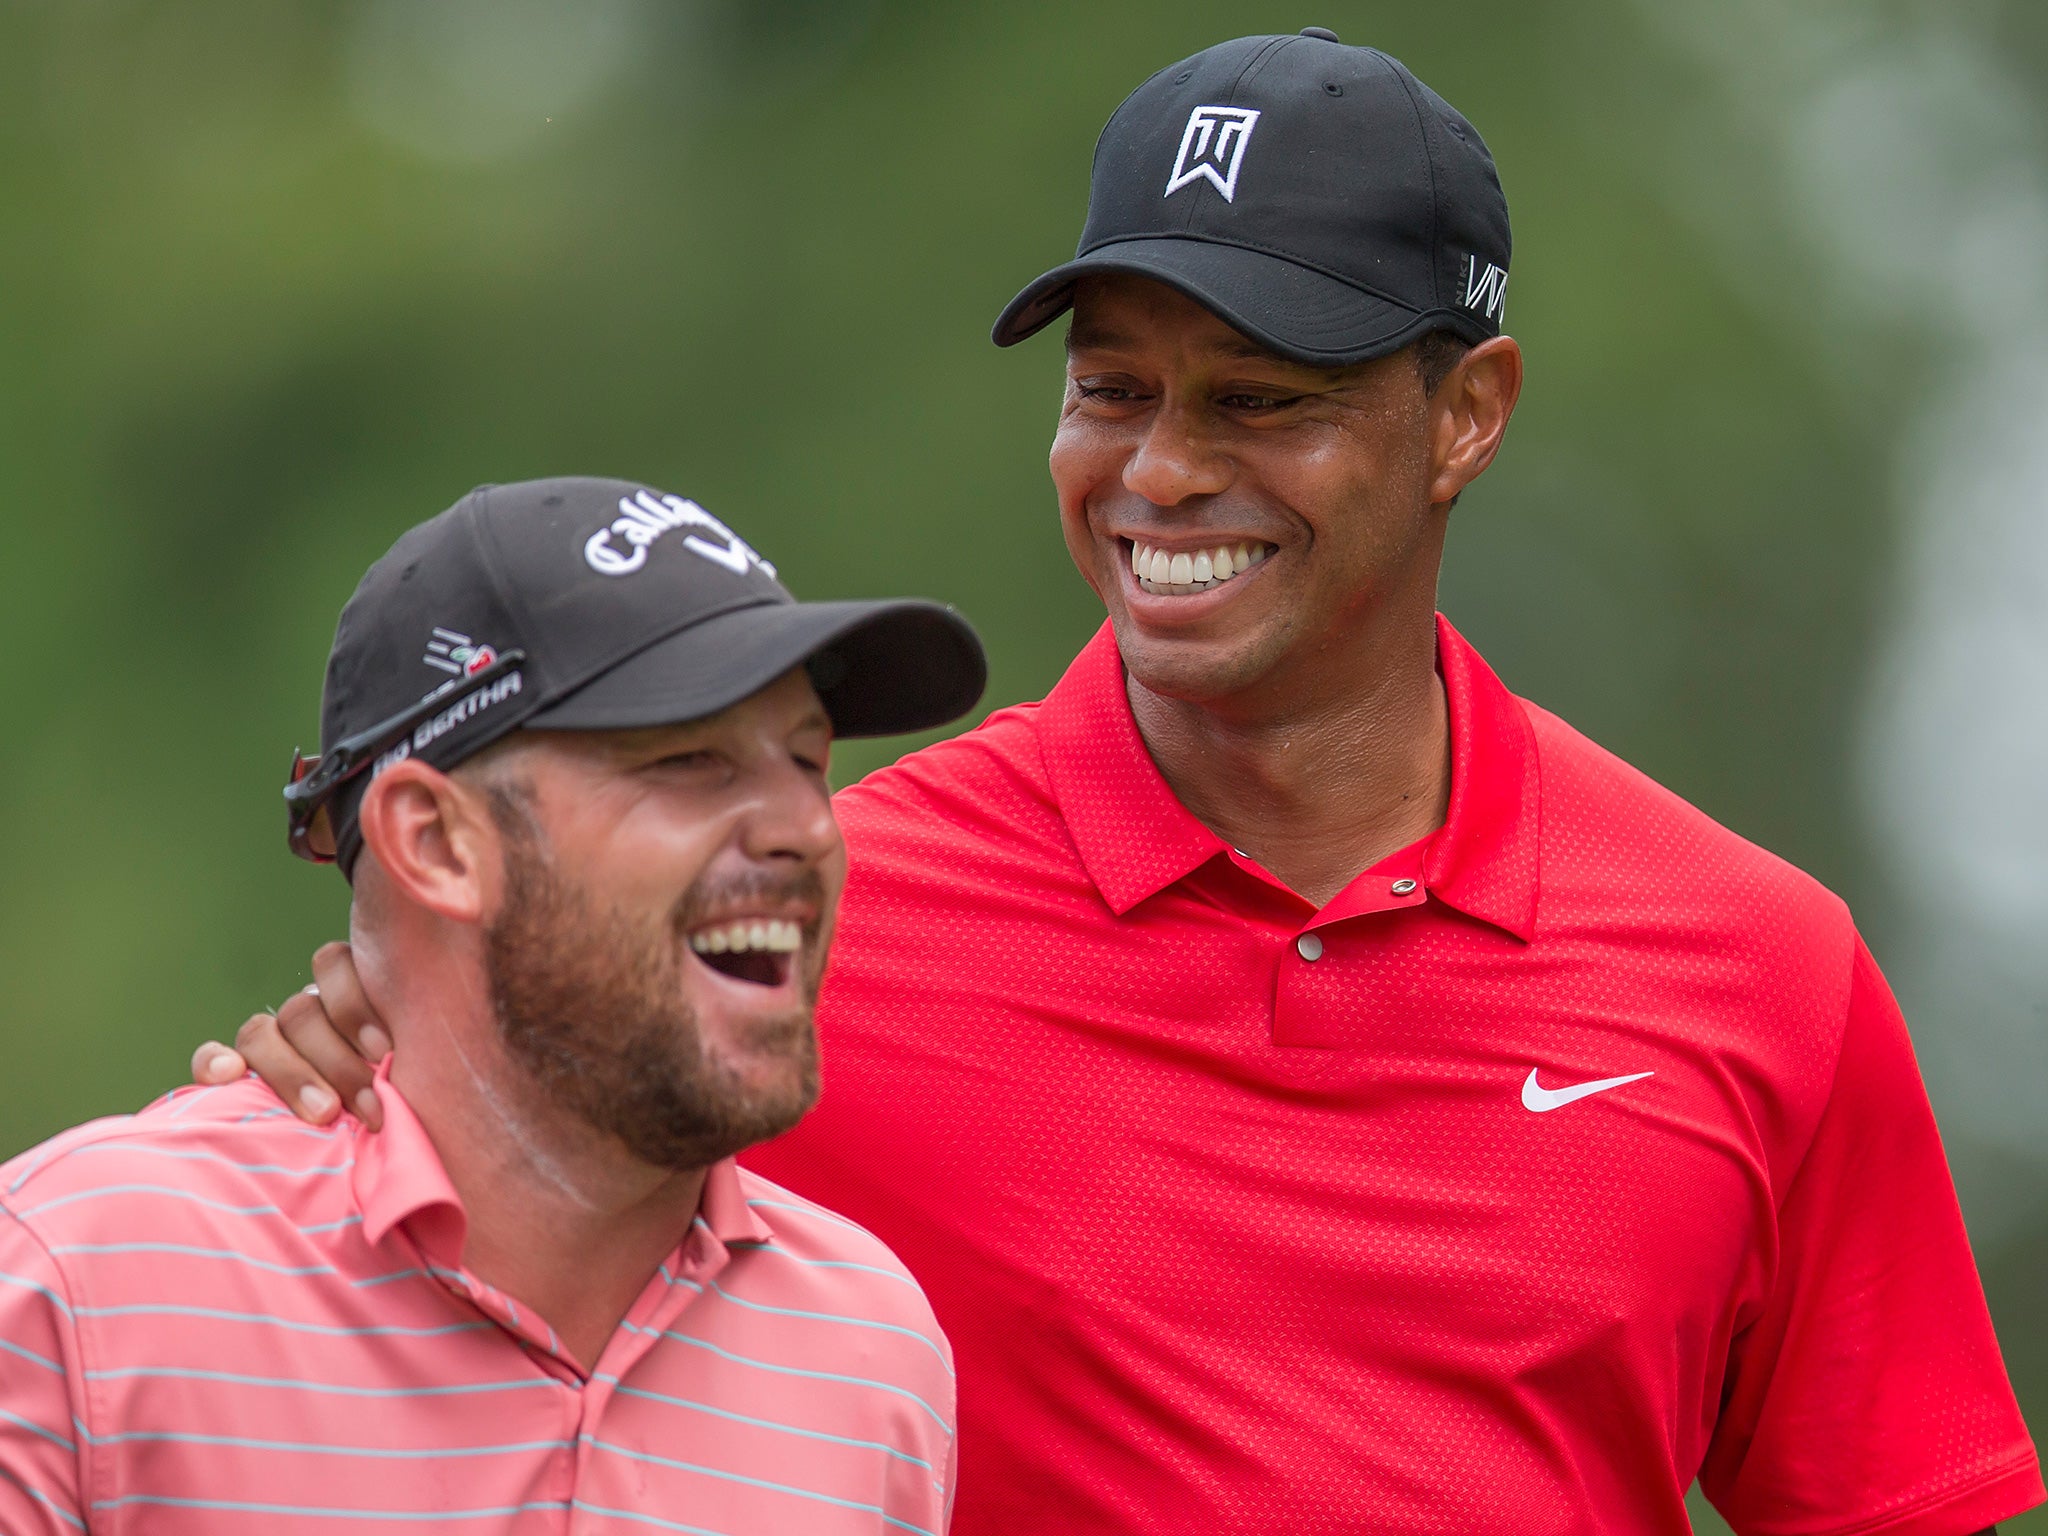 Tiger Woods congratulates his playing partner Scott Brown (left) after a hole-in-one